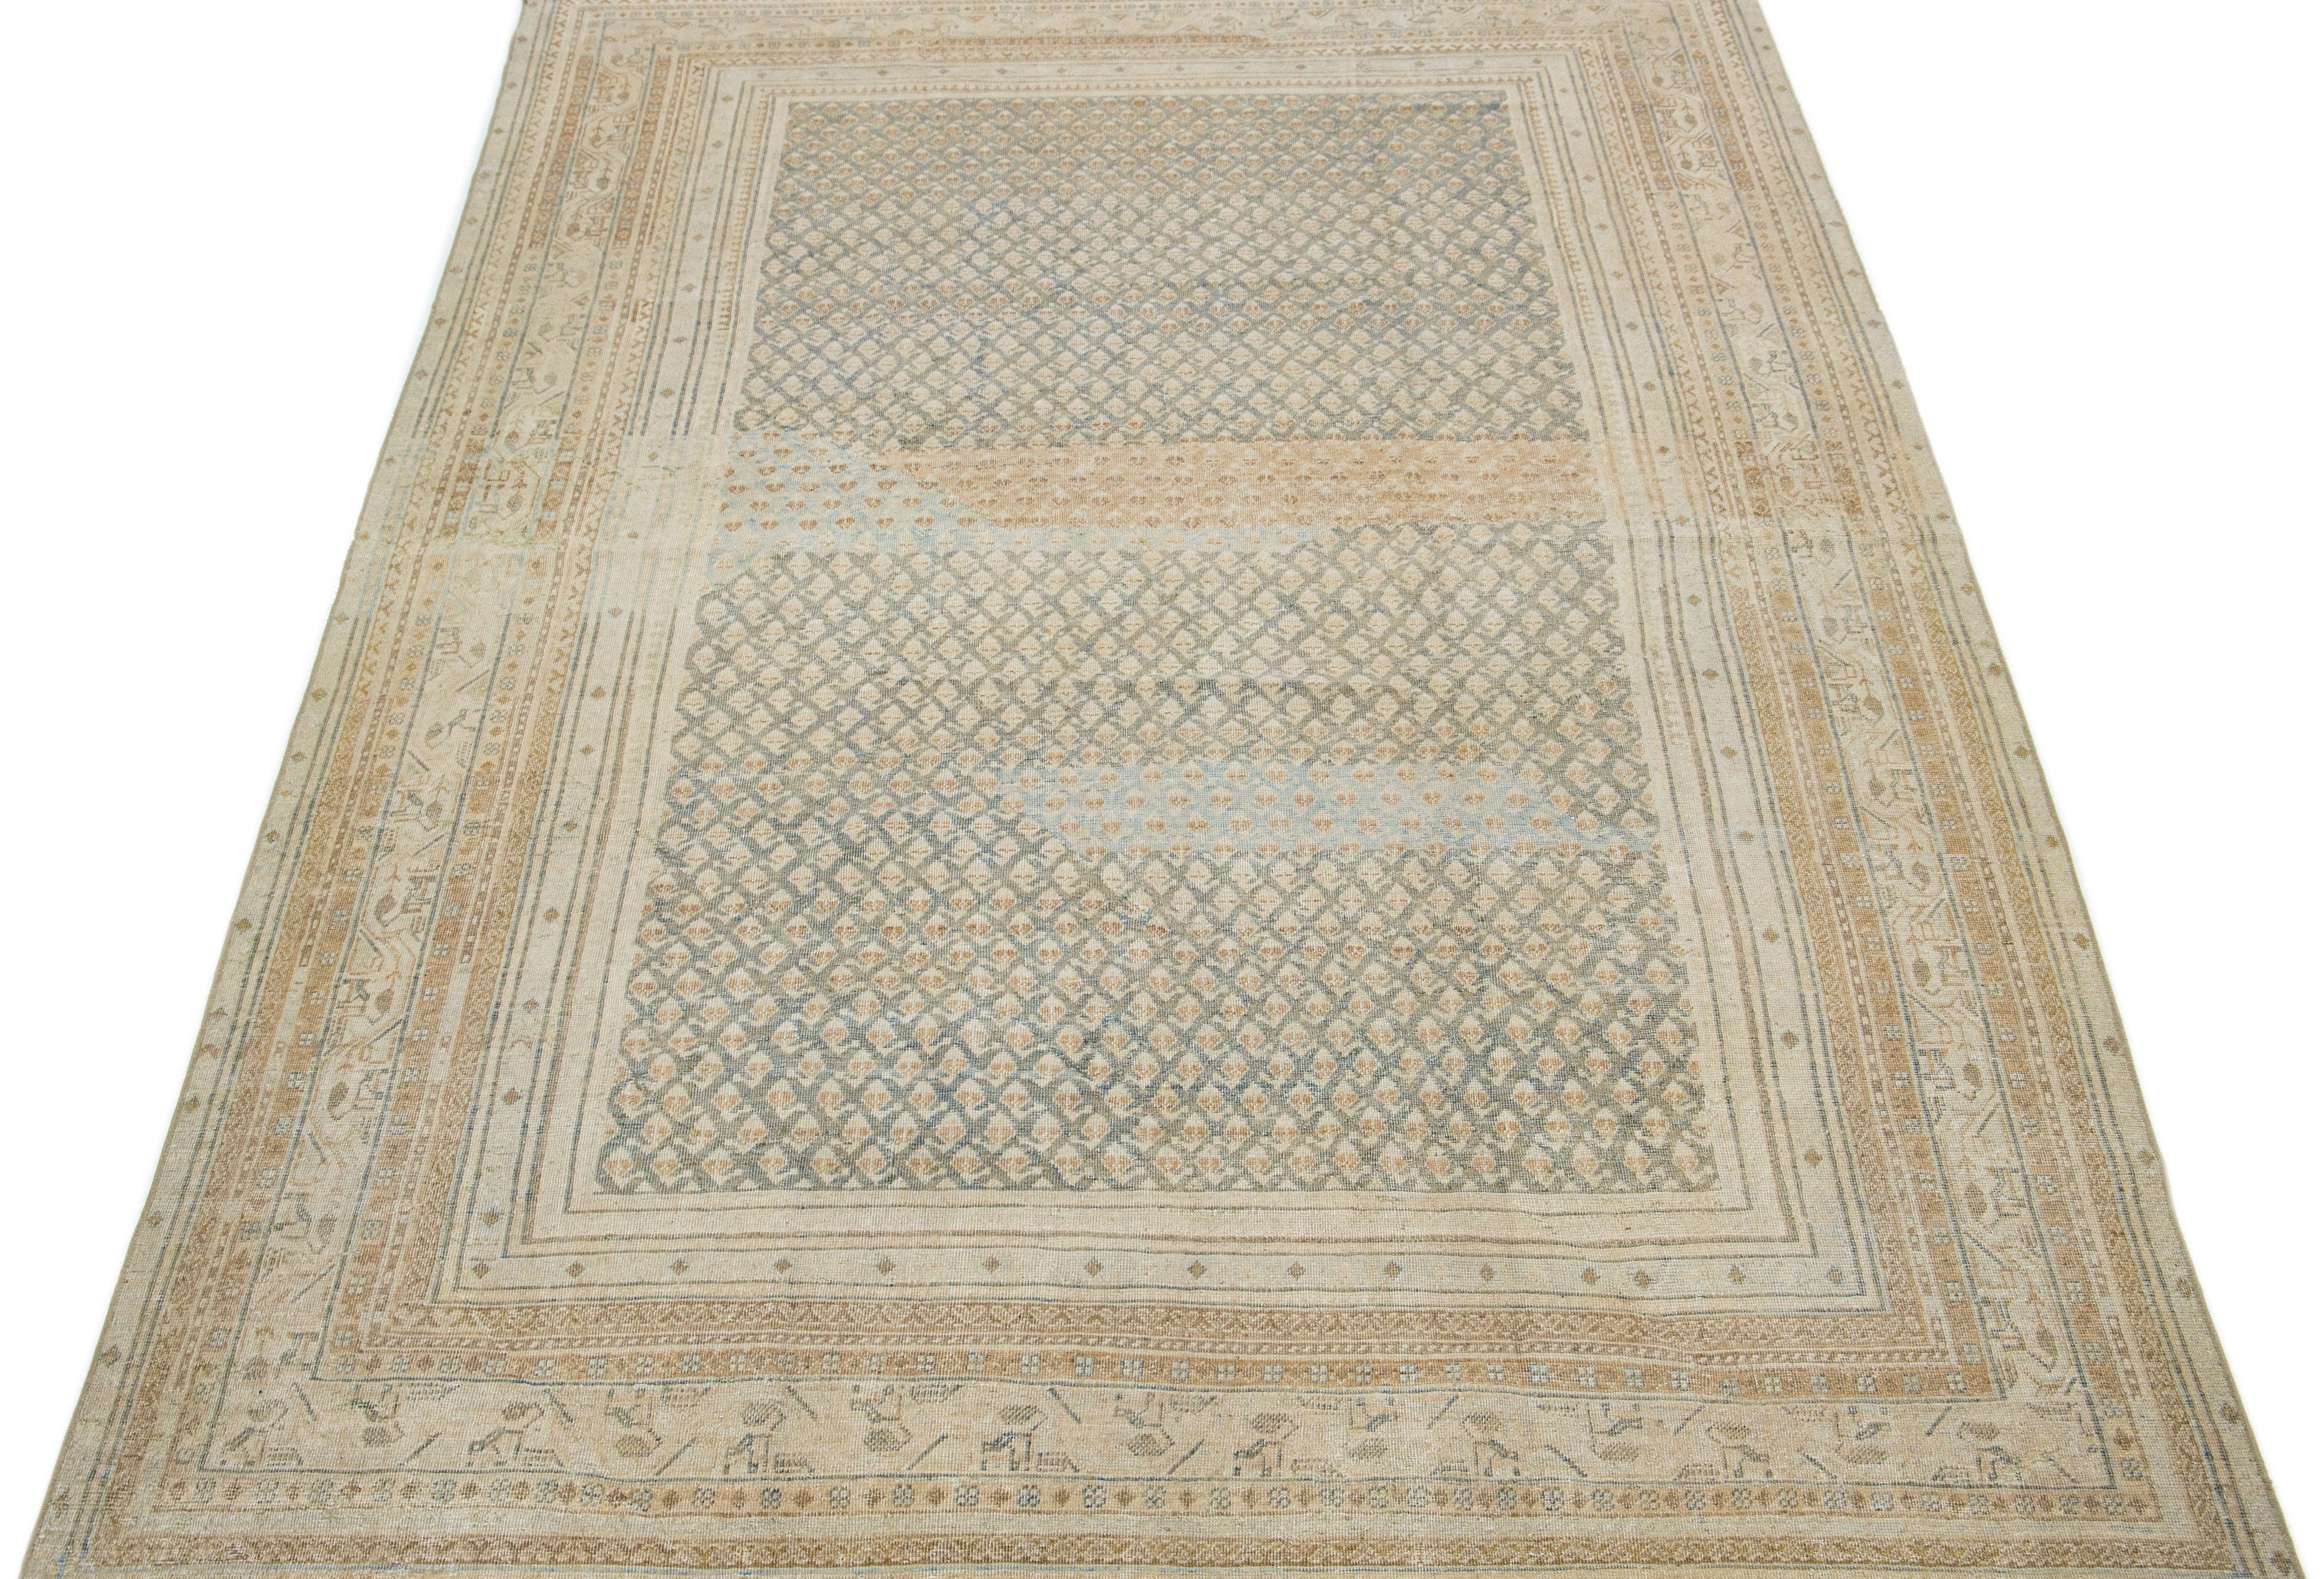 This exquisite antique Hamadan rug is hand knotted from premium wool, boasting a beige field complemented by a captivating, all-over pattern design enriched with brown and blue accents.

This rug measures 6'4